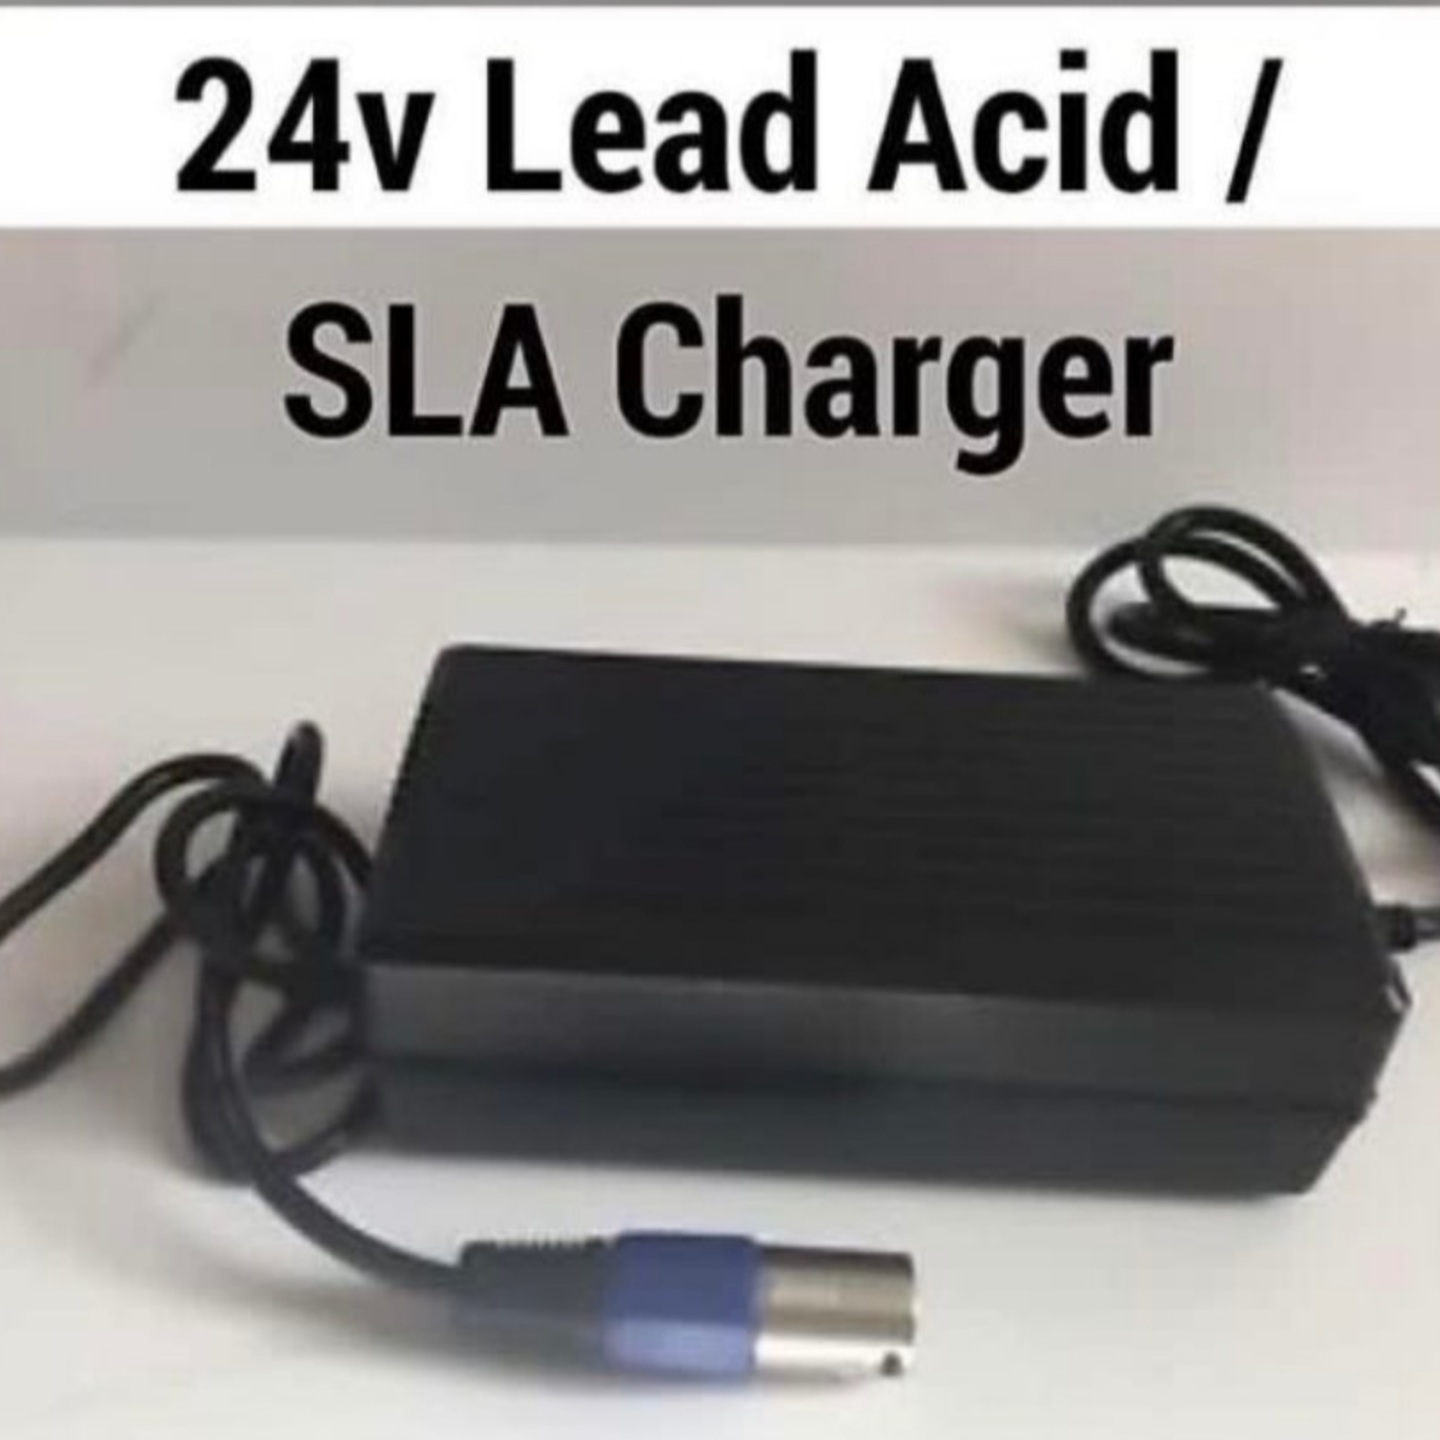 24v 7A charger for wheelchair with lead acid battery